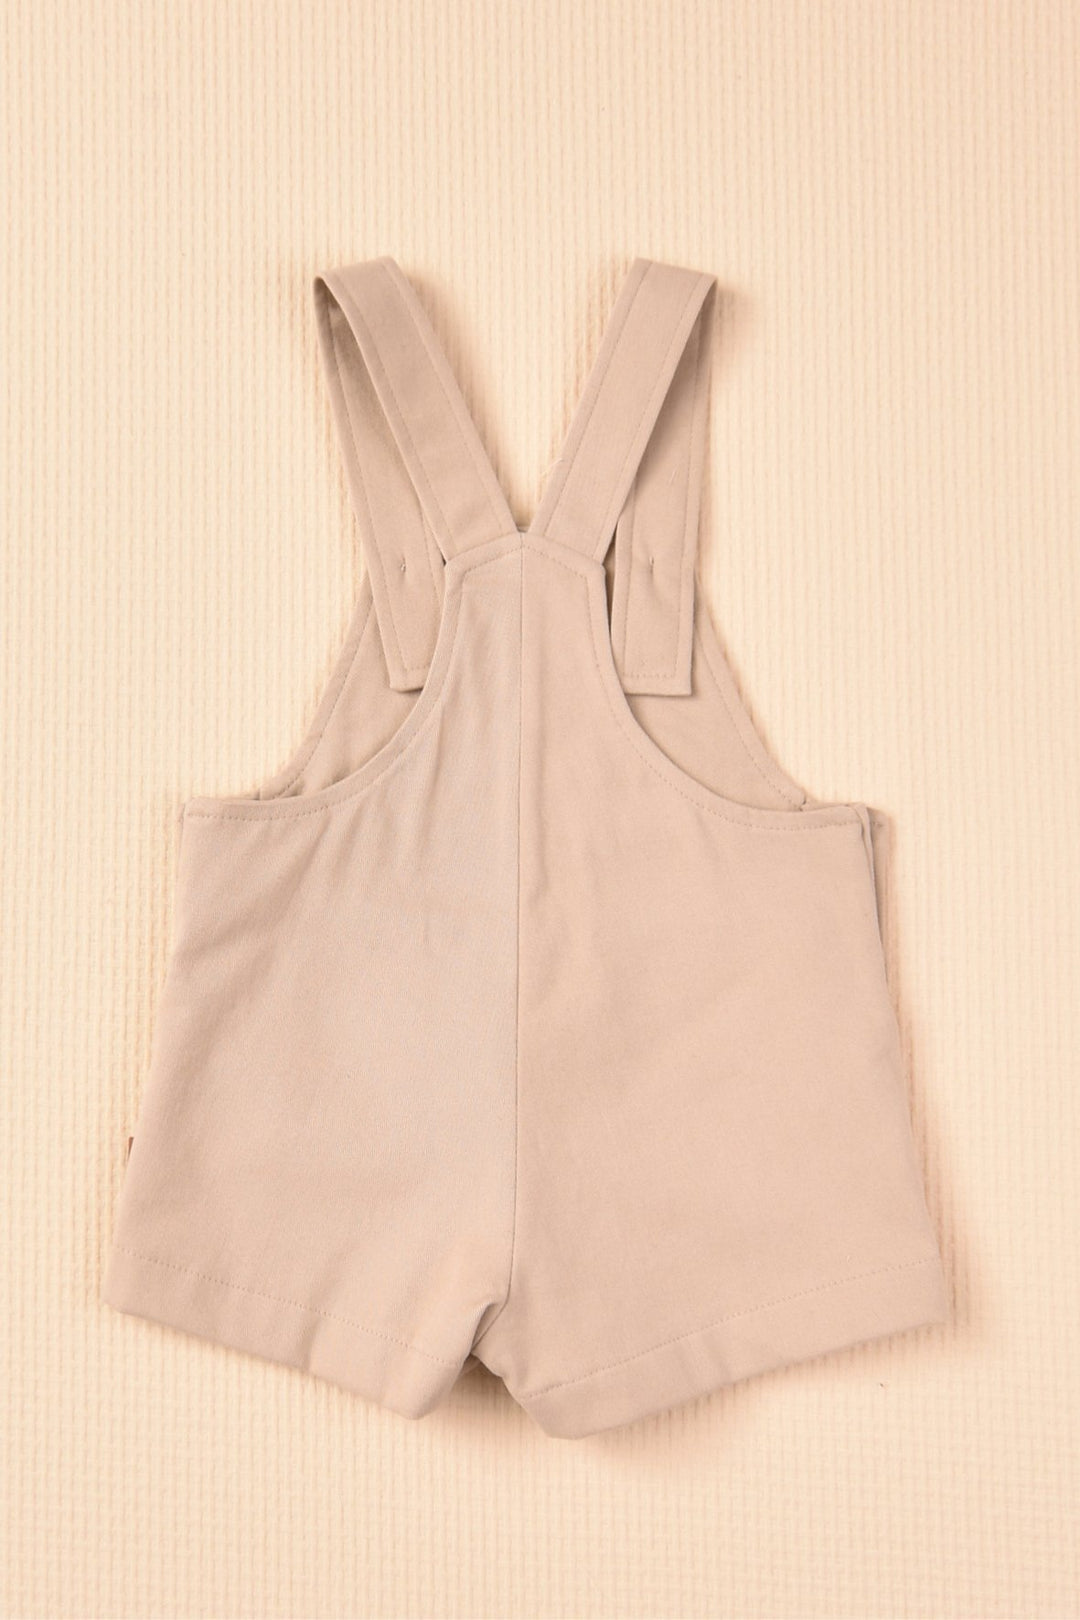 Cocote "Andrés" Brushed Cotton Dungarees | Millie and John